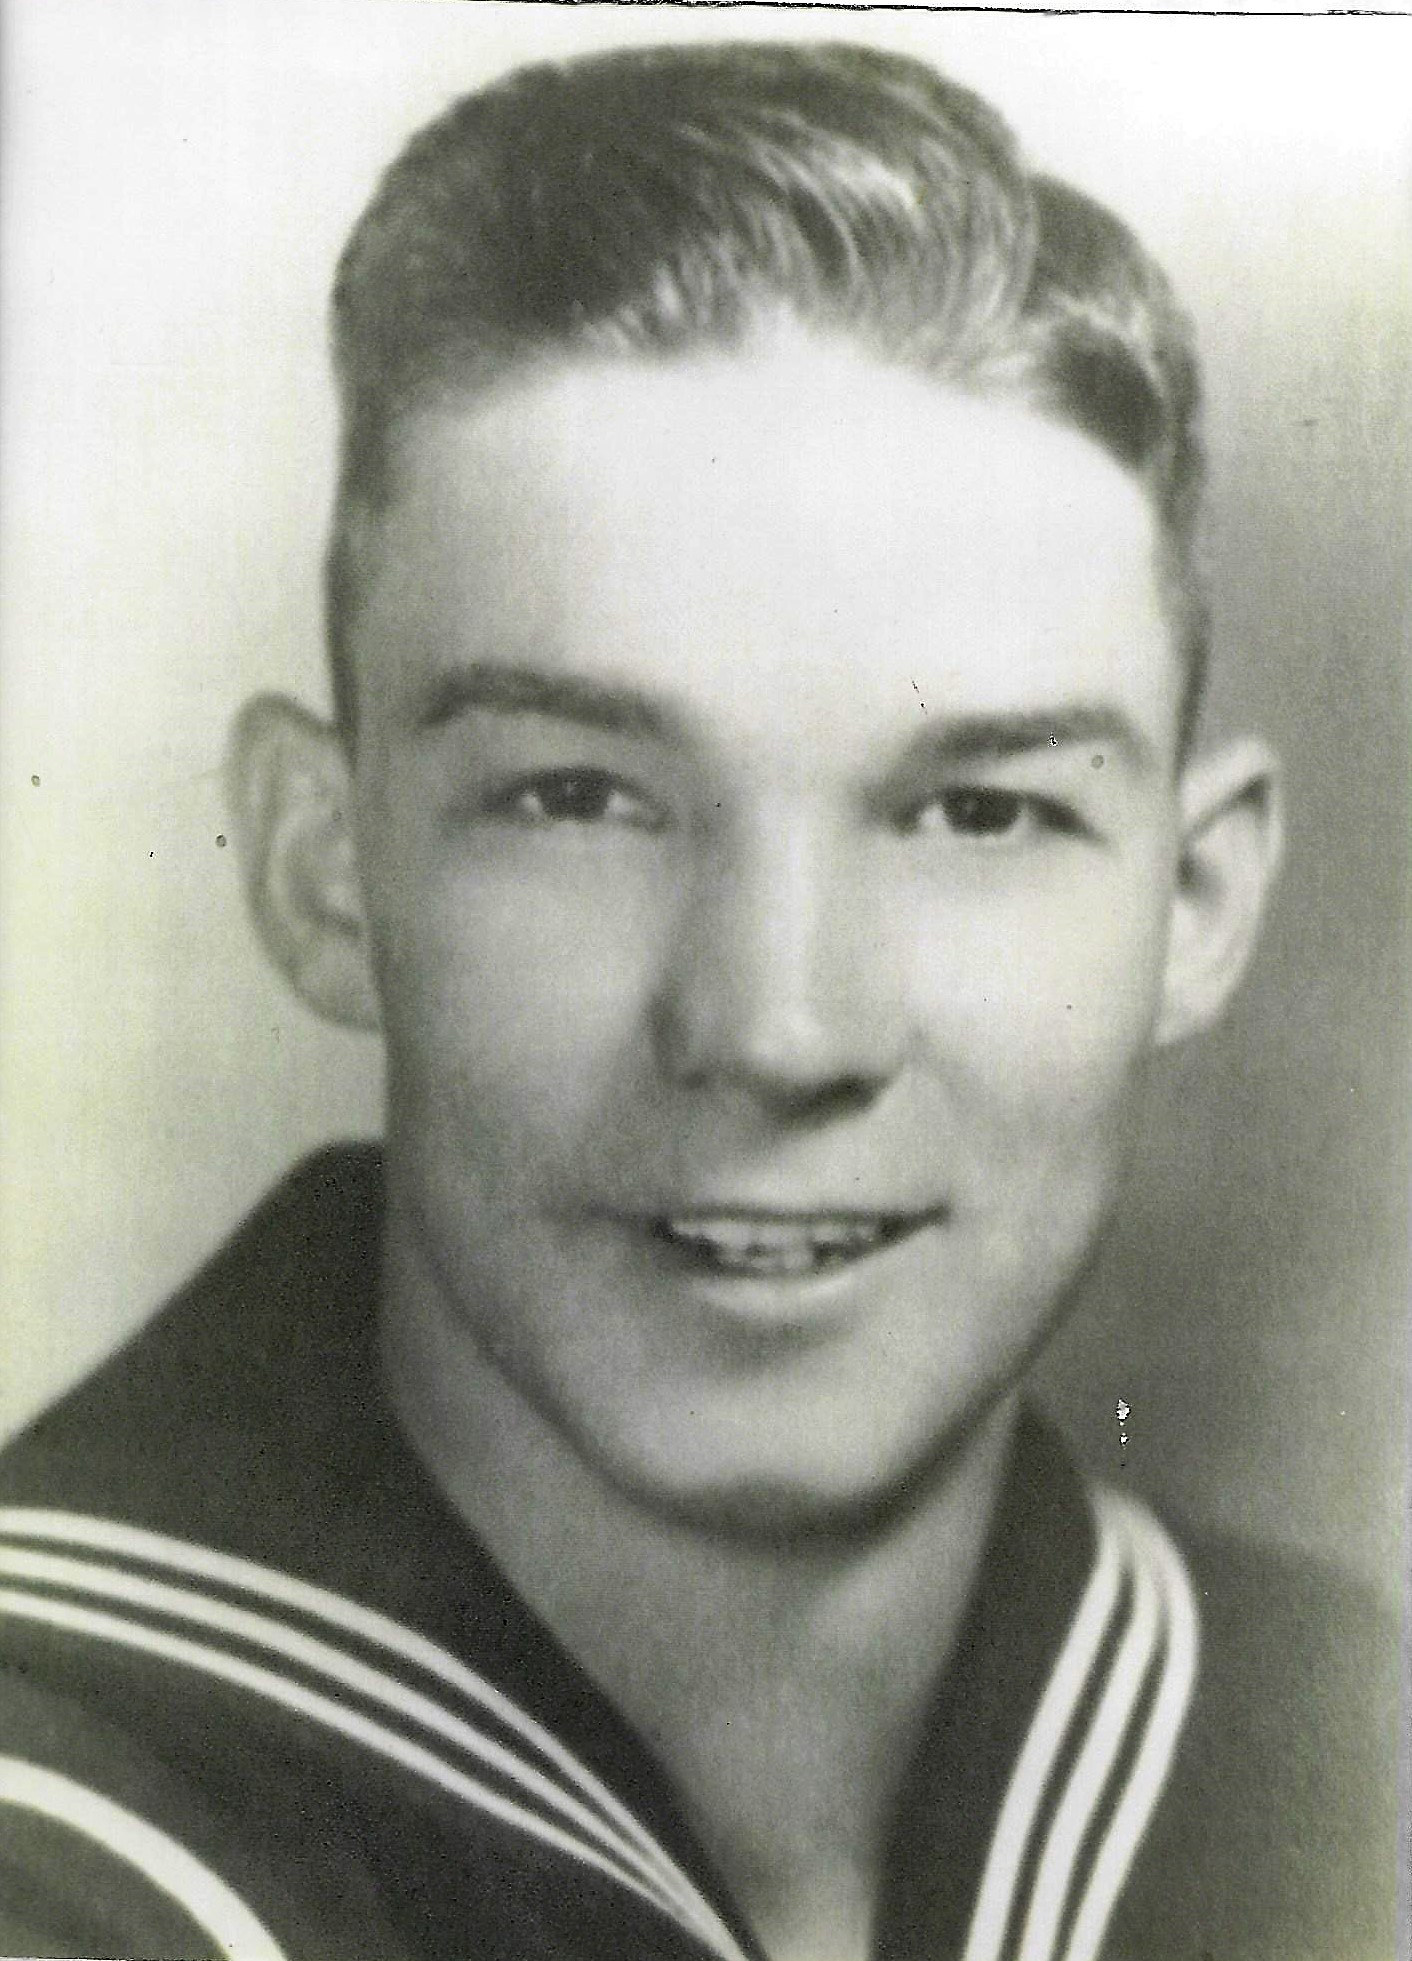 Victor Patrick "Pat" Tumlinson, 19, died on Dec. 7, 1941 in the attack on Pearl Harbor. He's being laid to rest 78 years later in his hometown in Raymondville, Texas. (Photo courtesy of James Patrick Tumlinson)